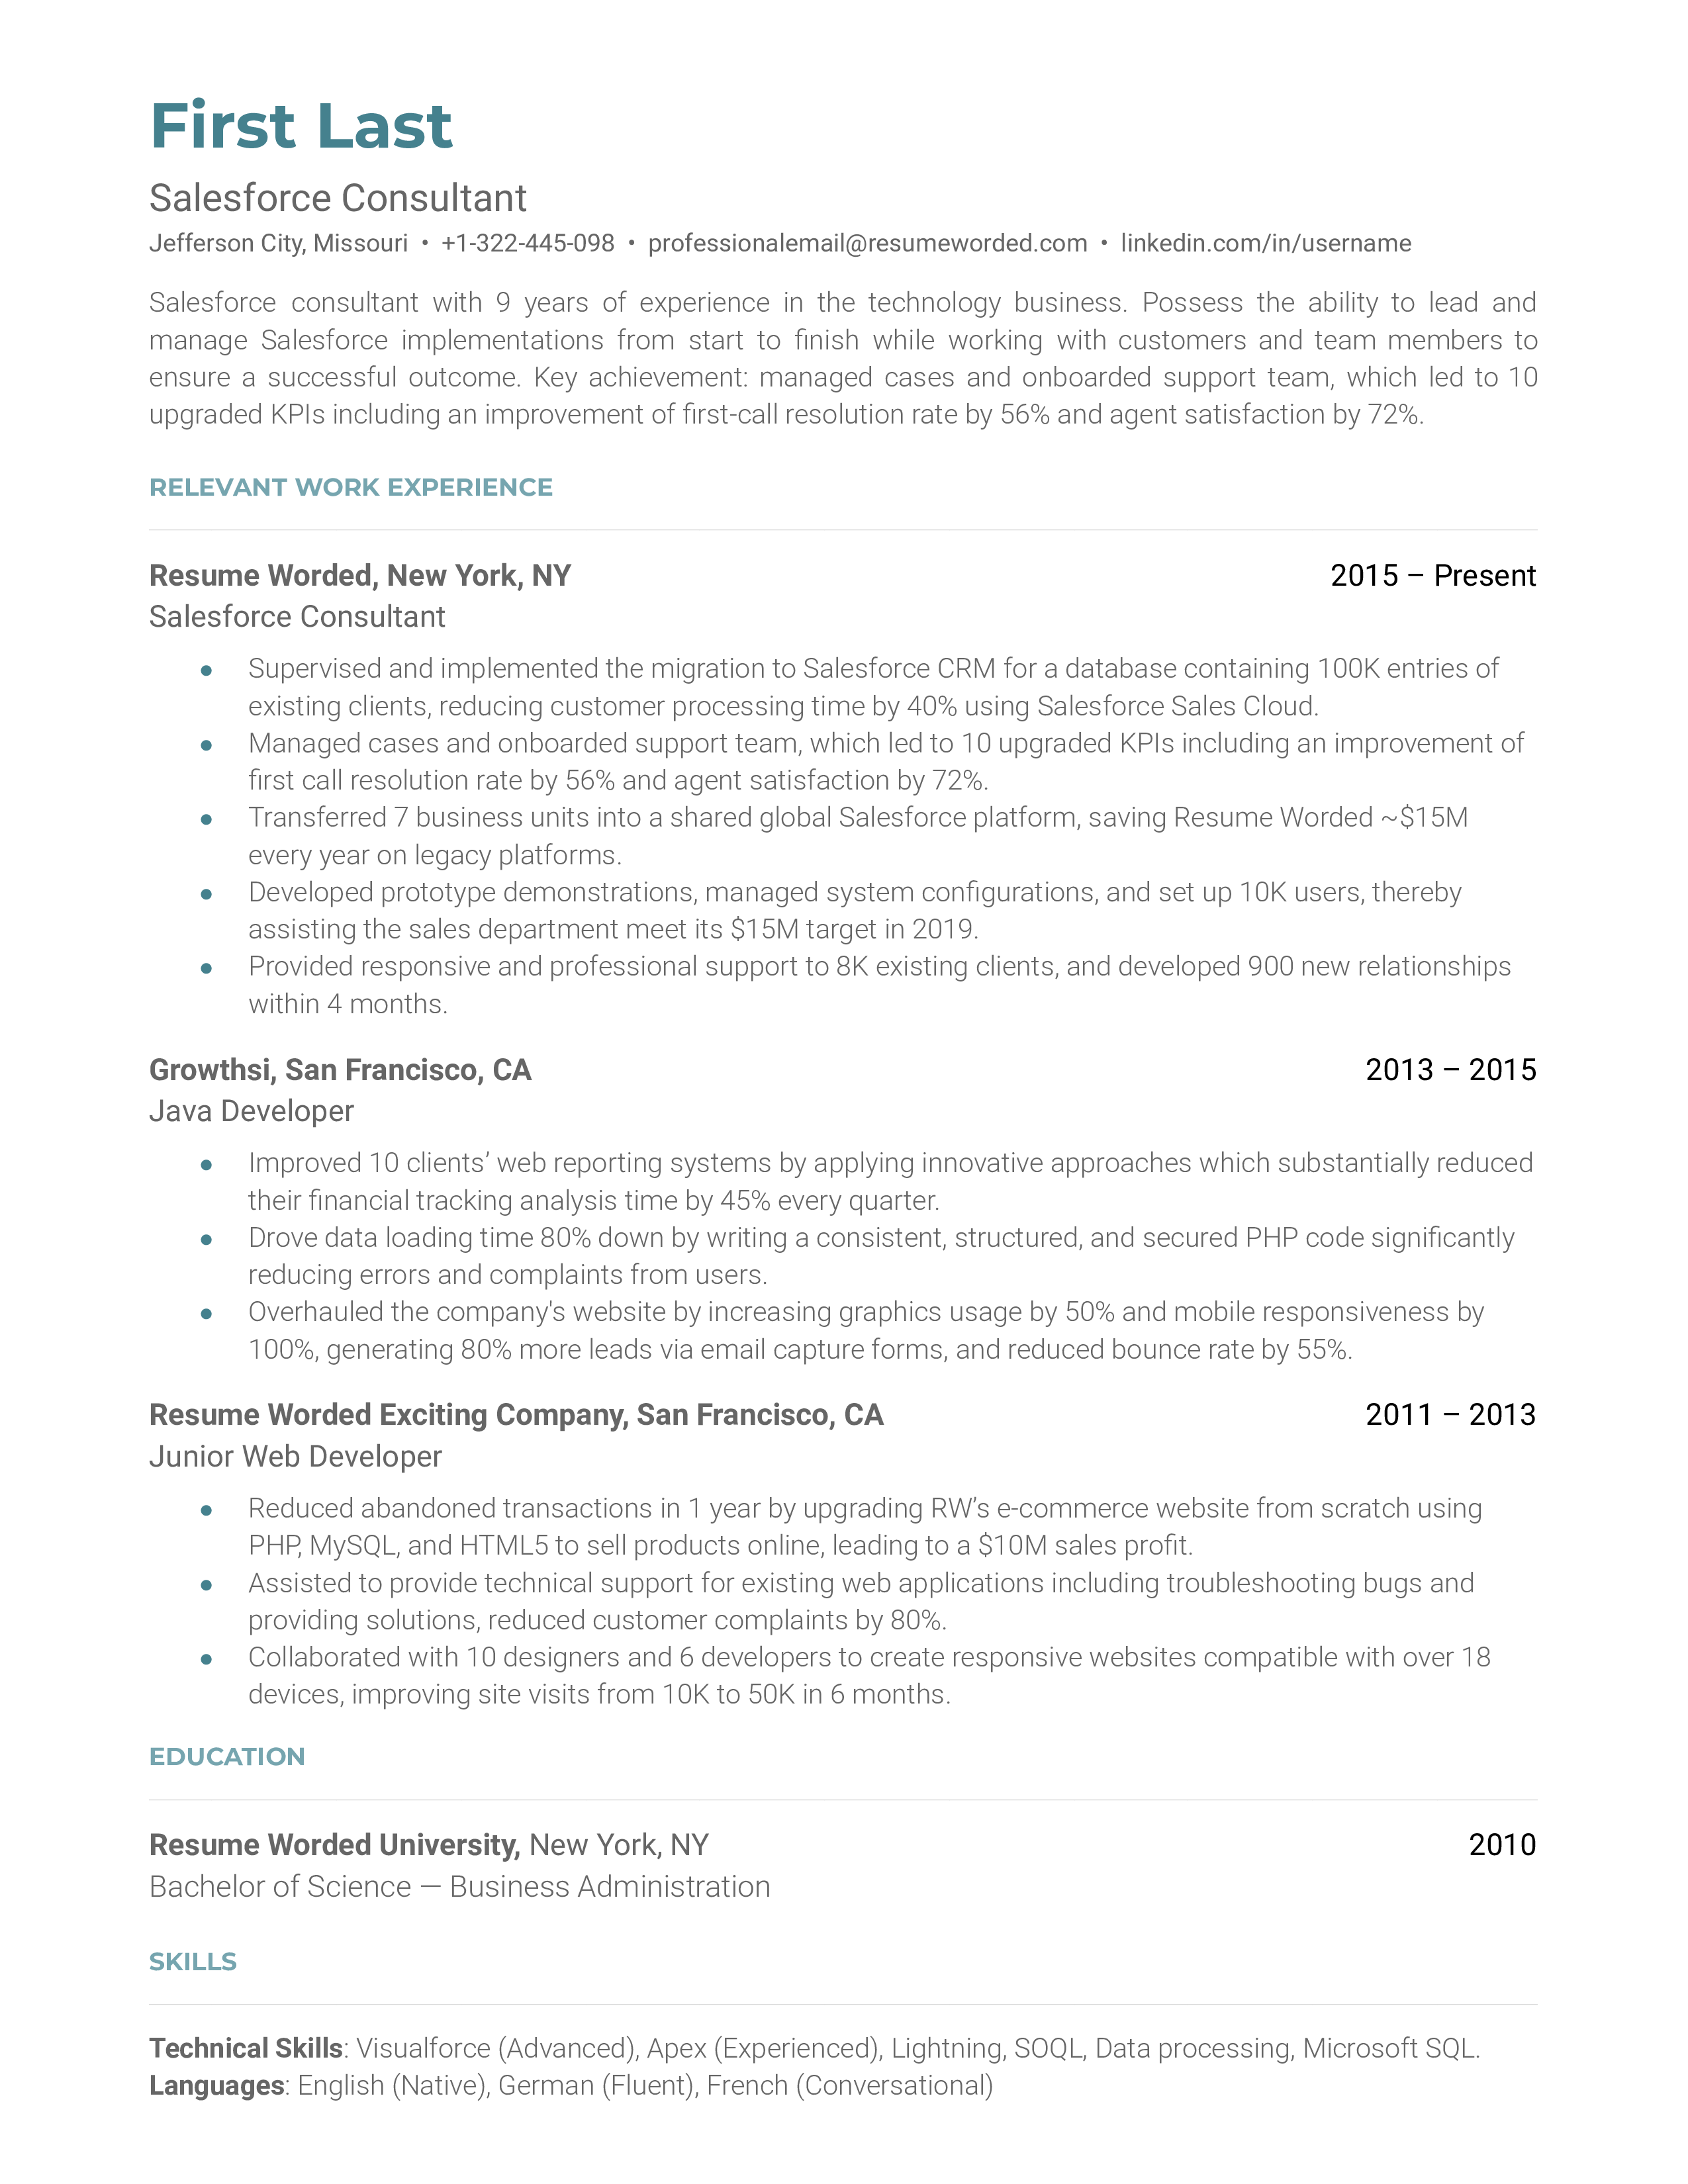 A Salesforce Consultant resume template that organizes work experience chronologically